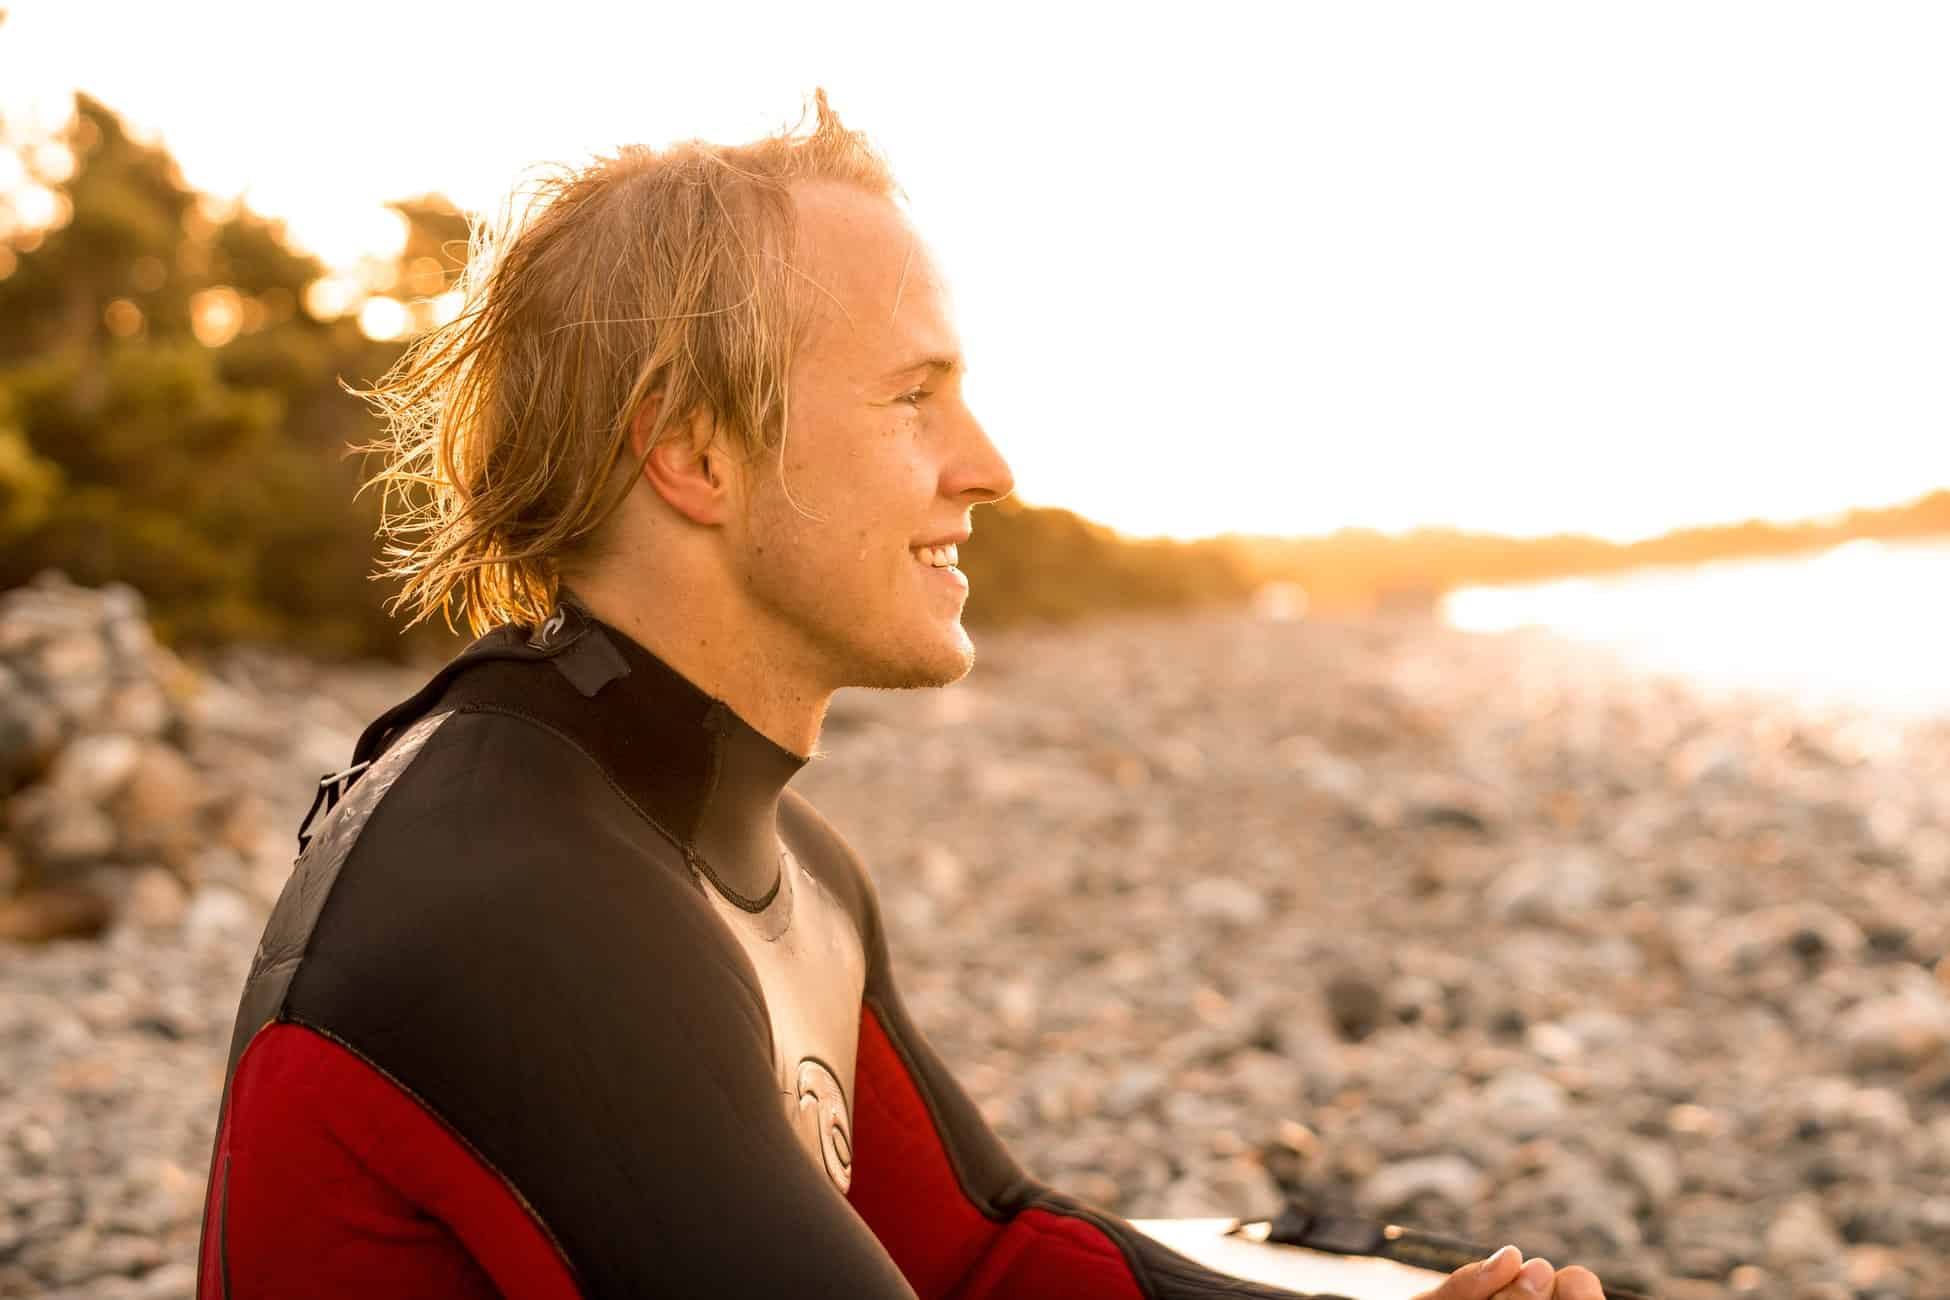 9. "Longish Blonde Hair Male Surfer" by Canva - wide 2